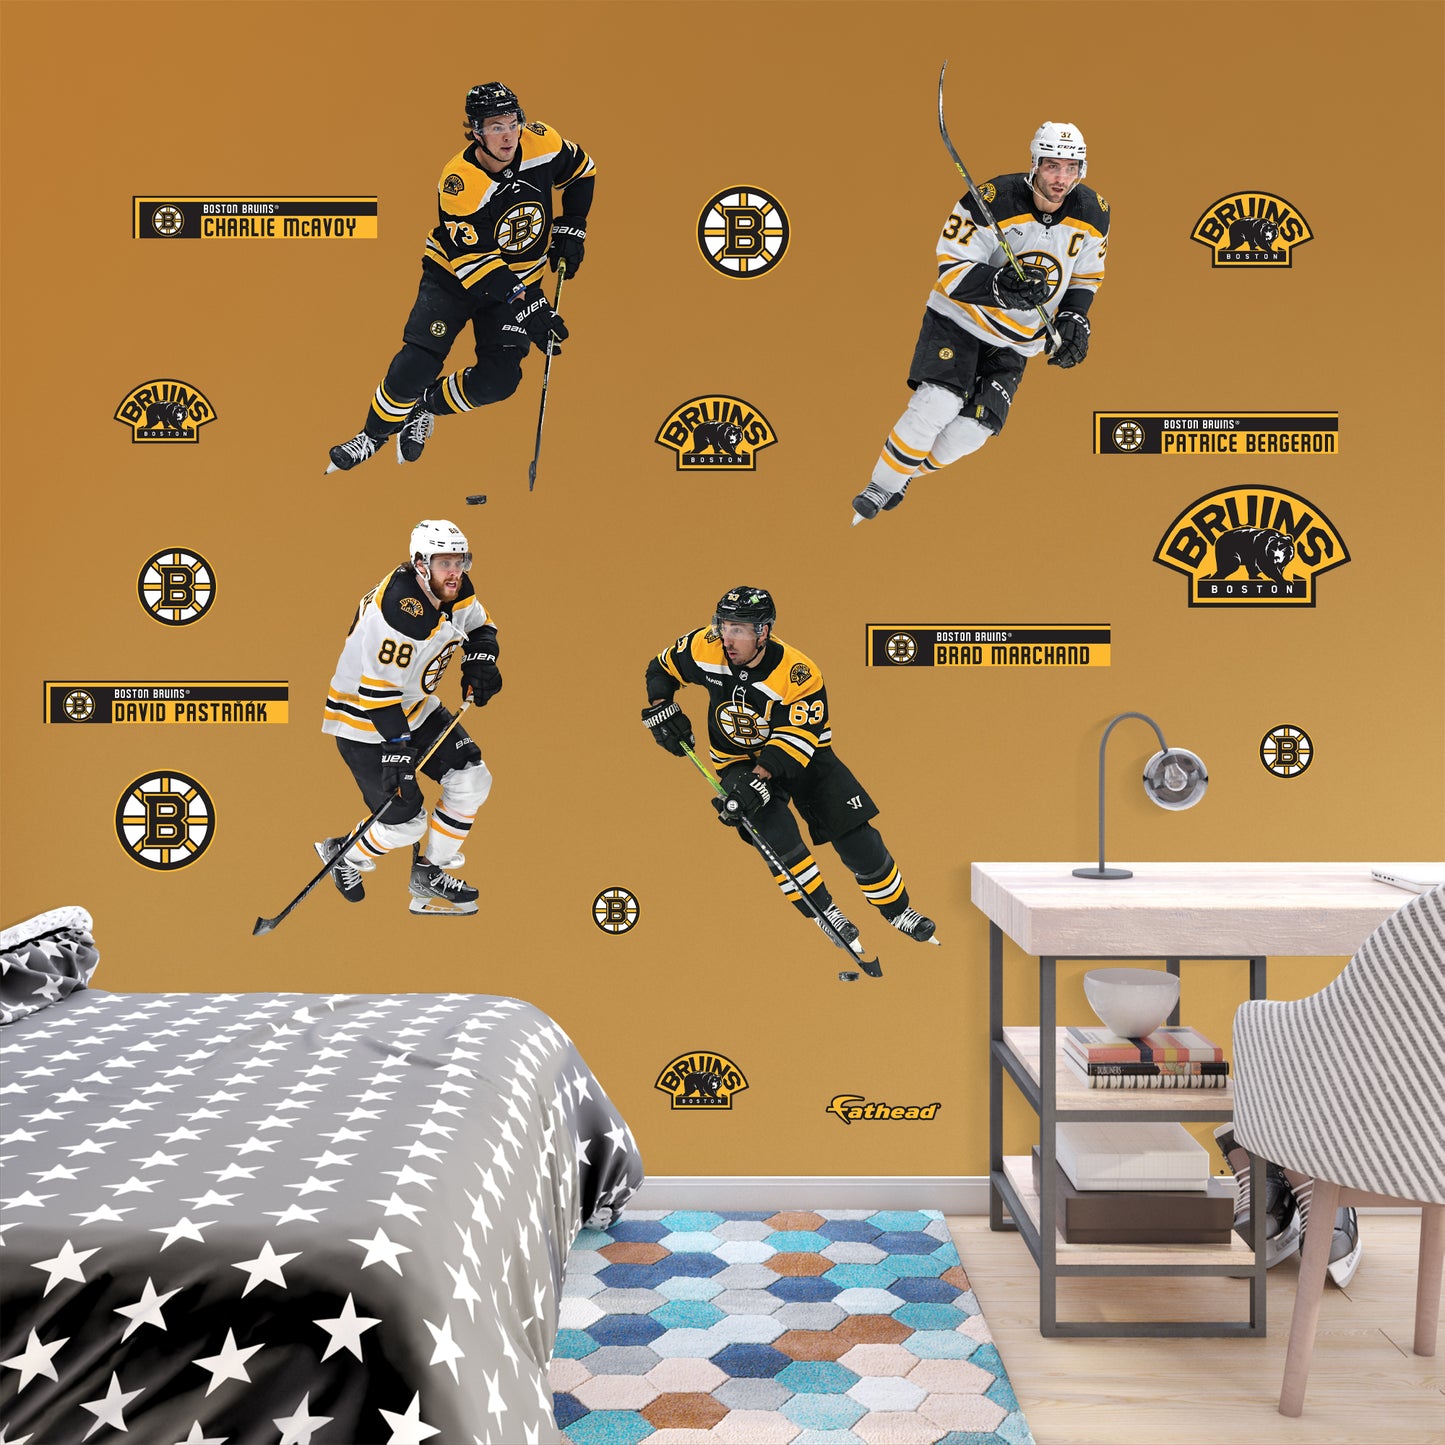 Boston Bruins: Patrice Bergeron, David Pastr≈à√°k, Brad Marchand and Charlie McAvoy Team Collection - Officially Licensed NHL Removable Adhesive Decal